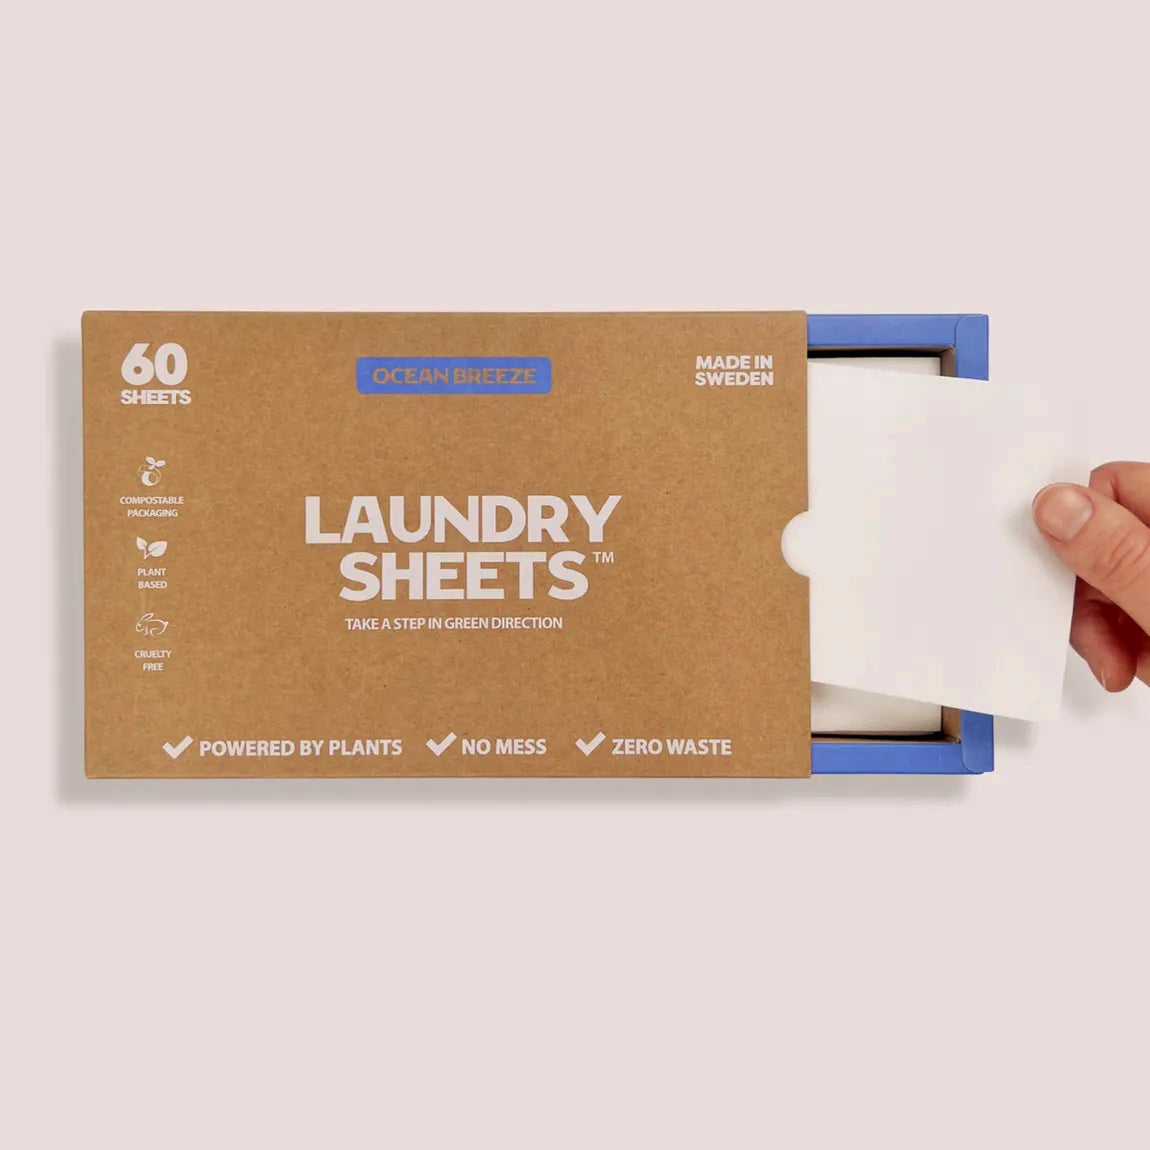 Eco-friendly Laundry Sheets - Convenient and effective sheets for sustainable and fresh laundry